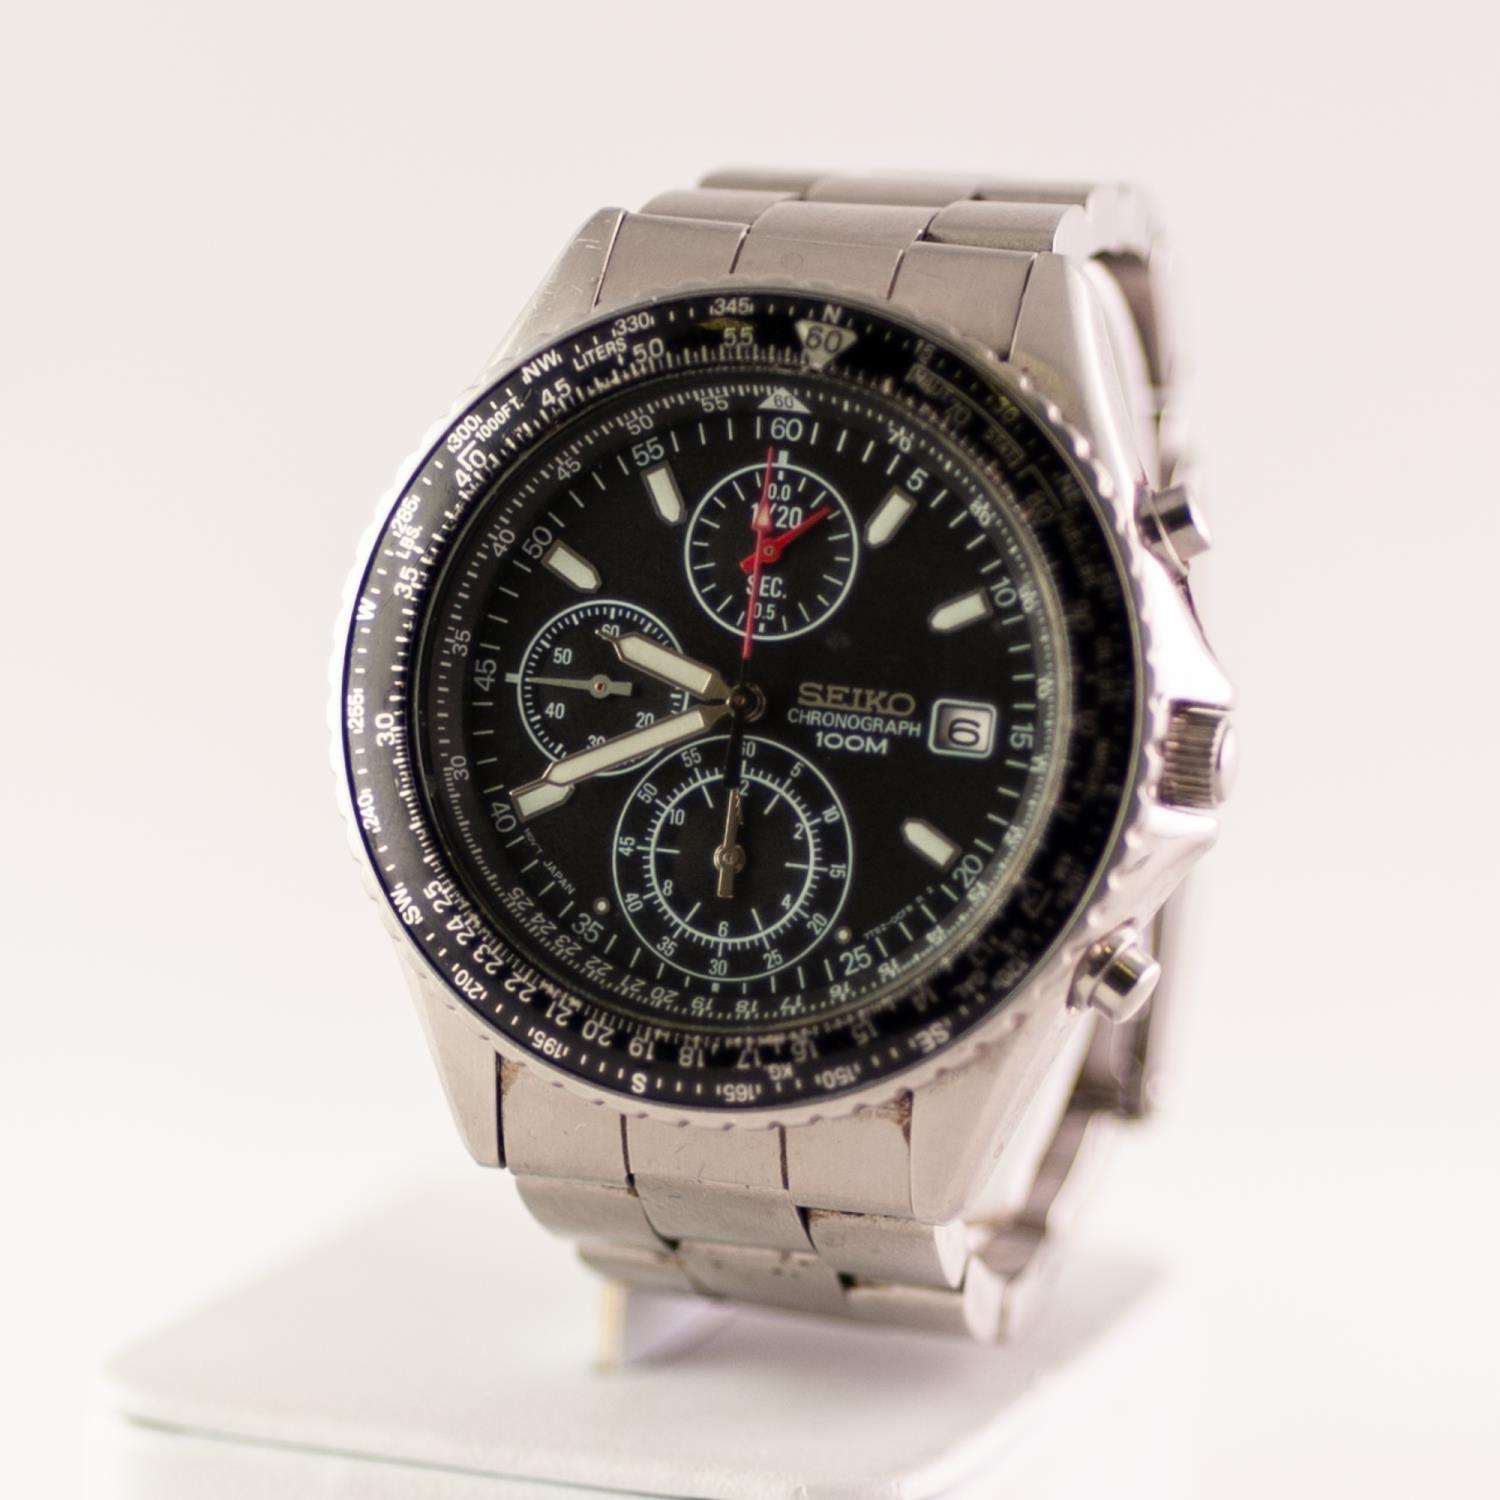 A GENTS STAINLESS STEEL SEIKO CHRONOGRAPH 100M QUARTZ WRISTWATCH The circular black dial with